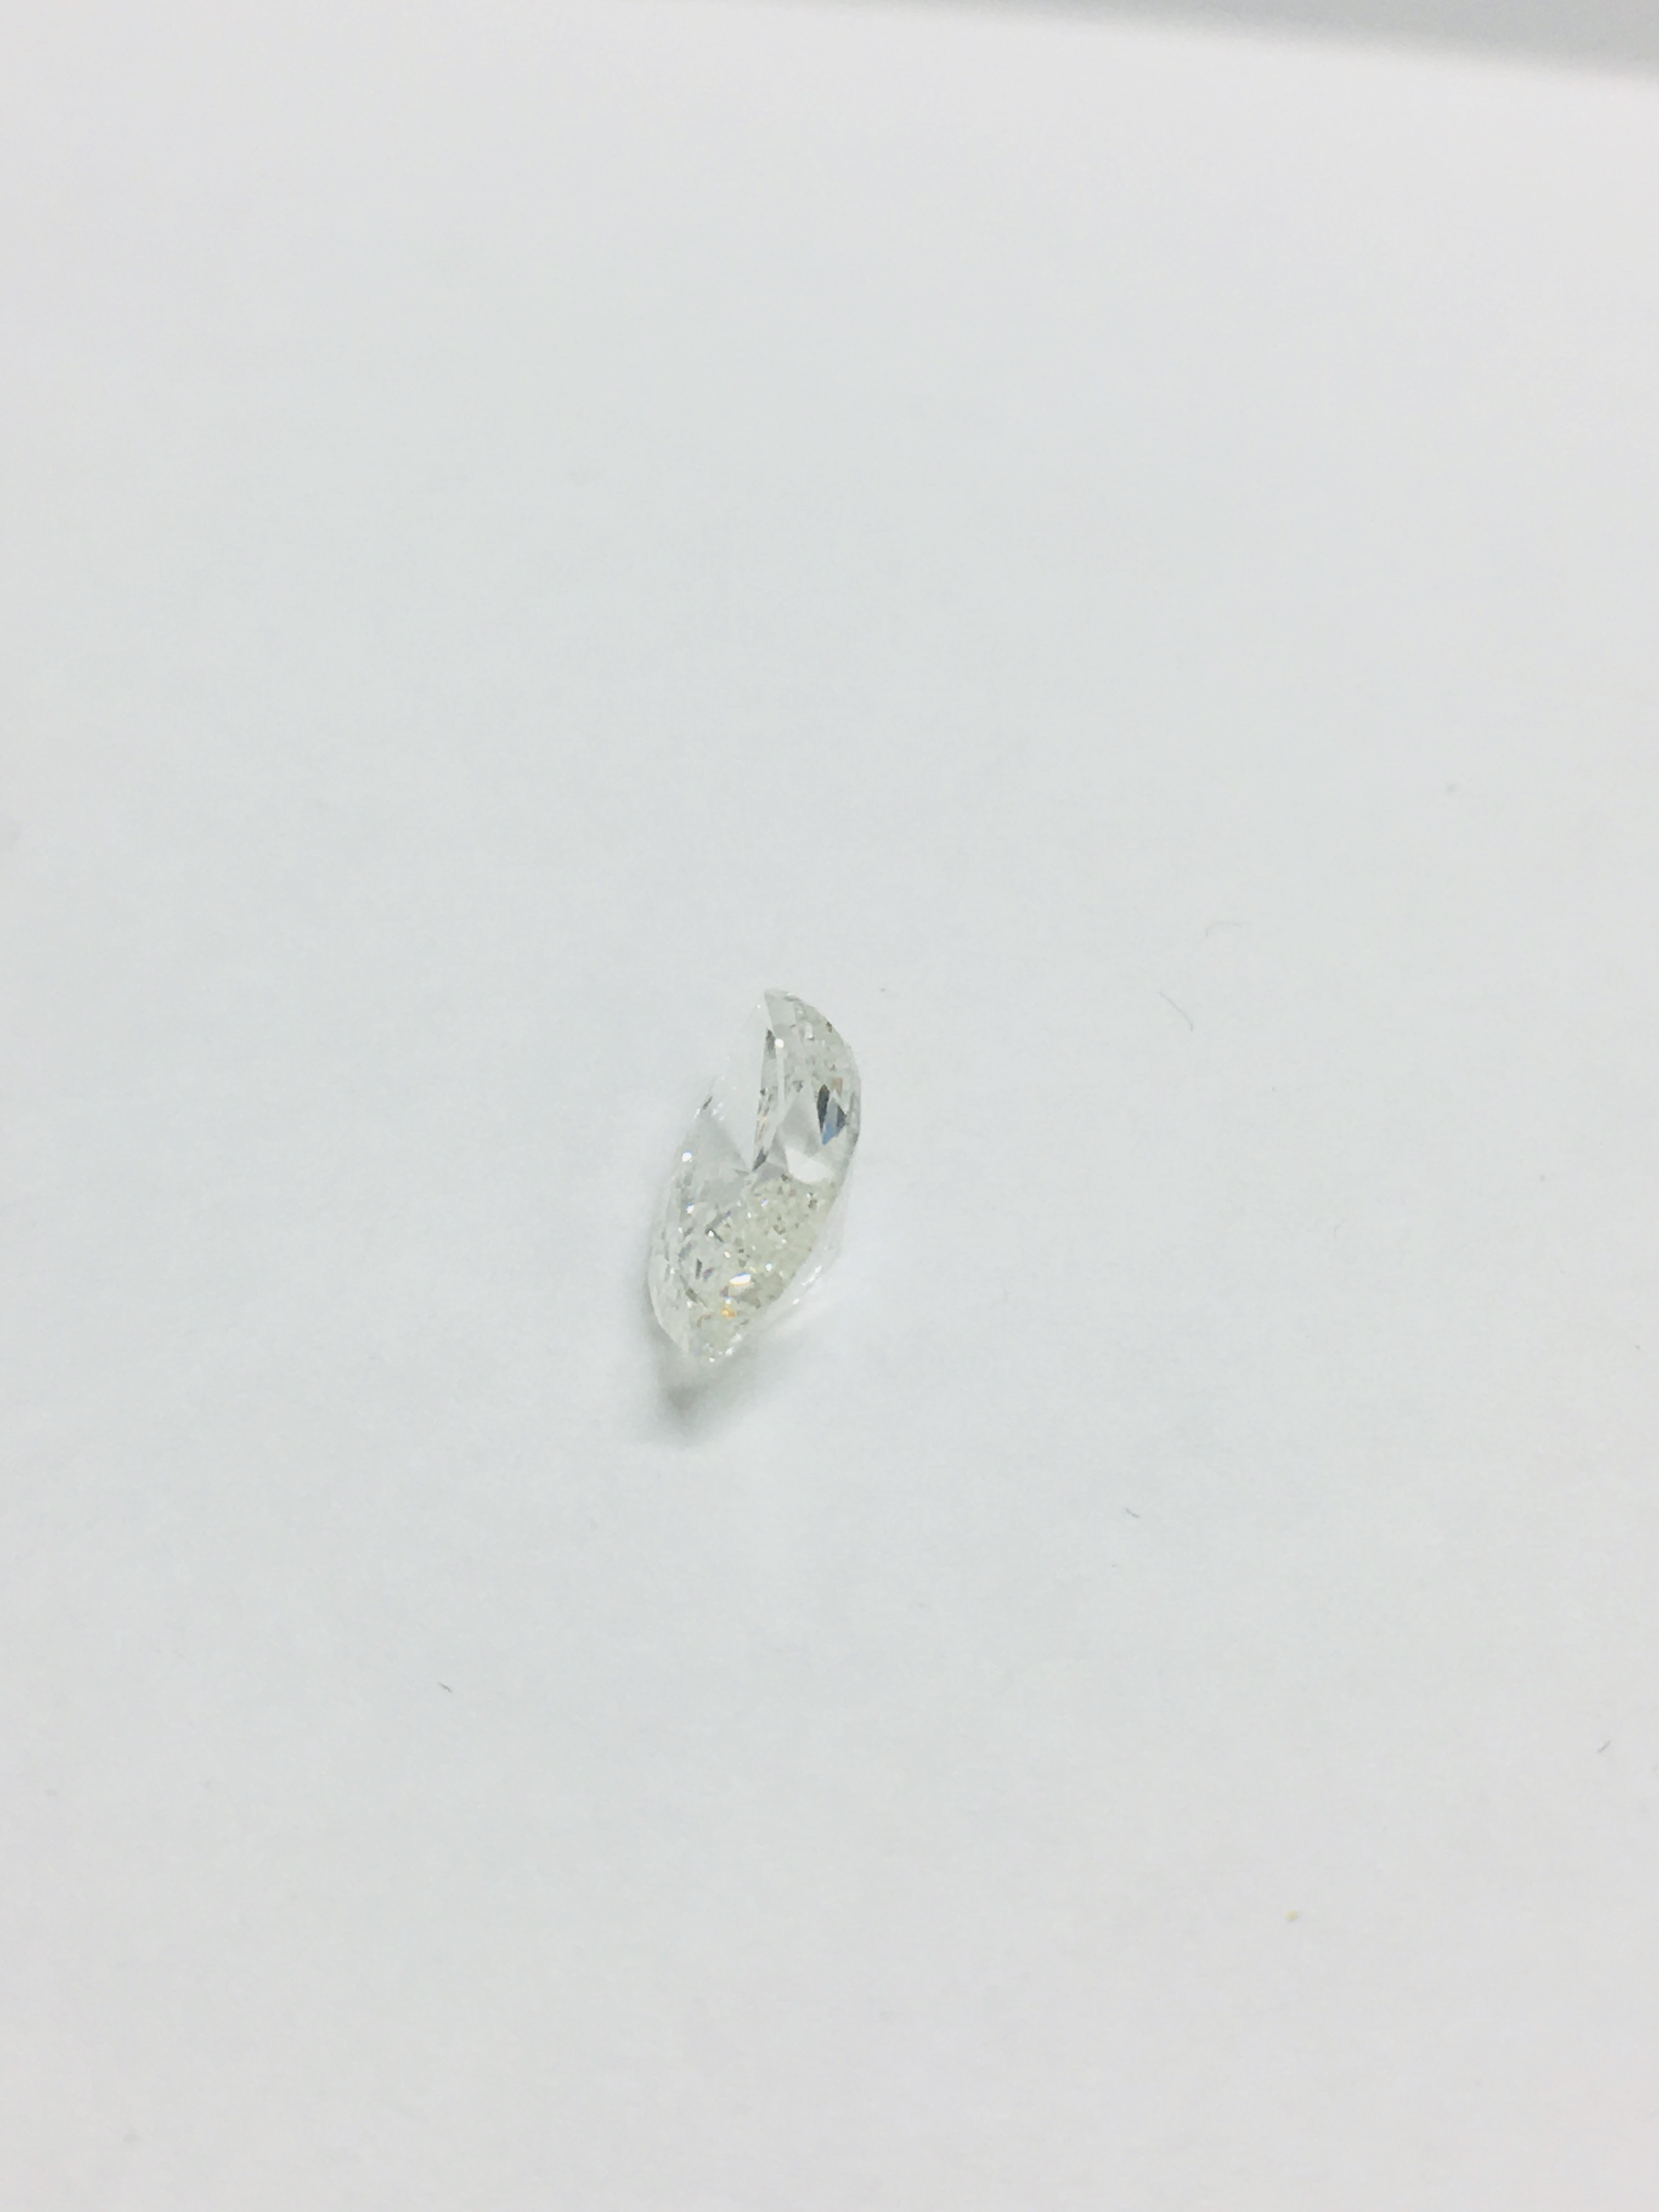 1.23ct Marquis cut Natural Diamond,H colour,si2 clarity - Image 3 of 5